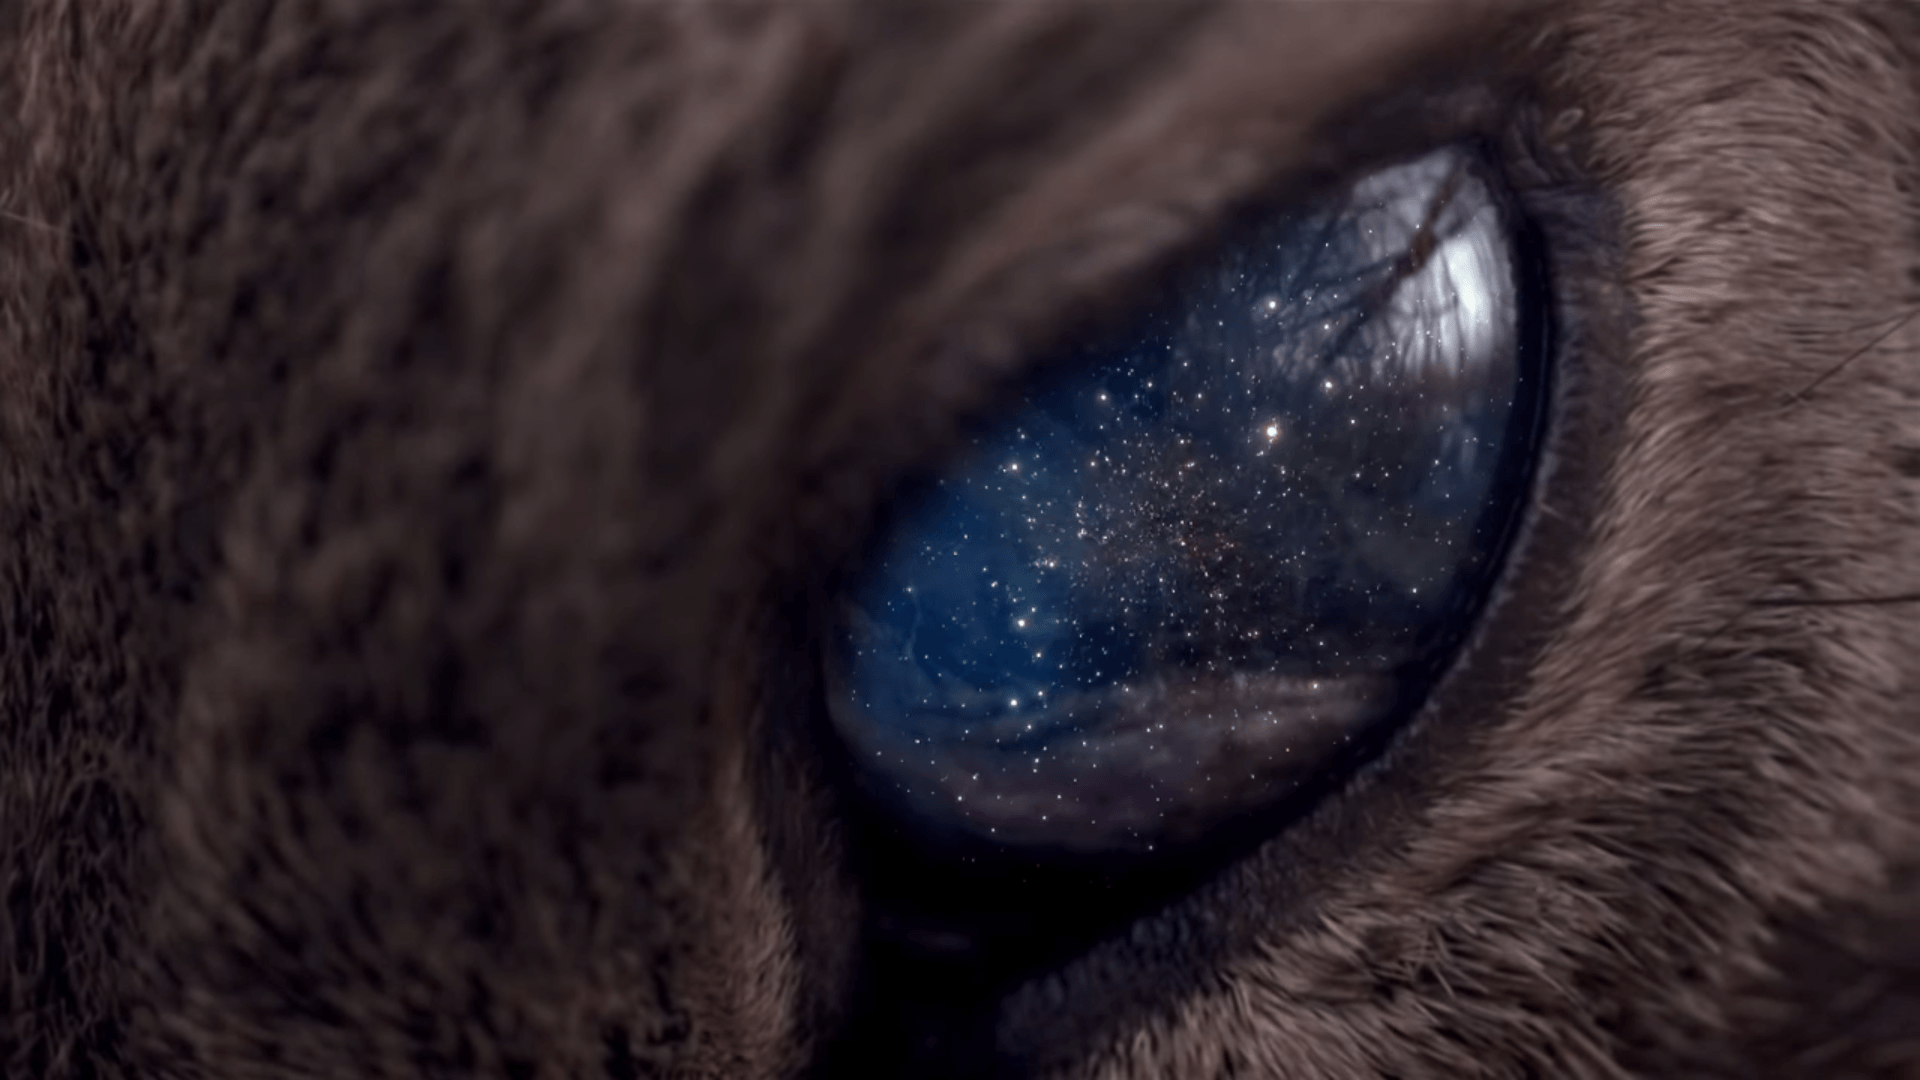 Universe is in the eye of the animal wallpaper and image